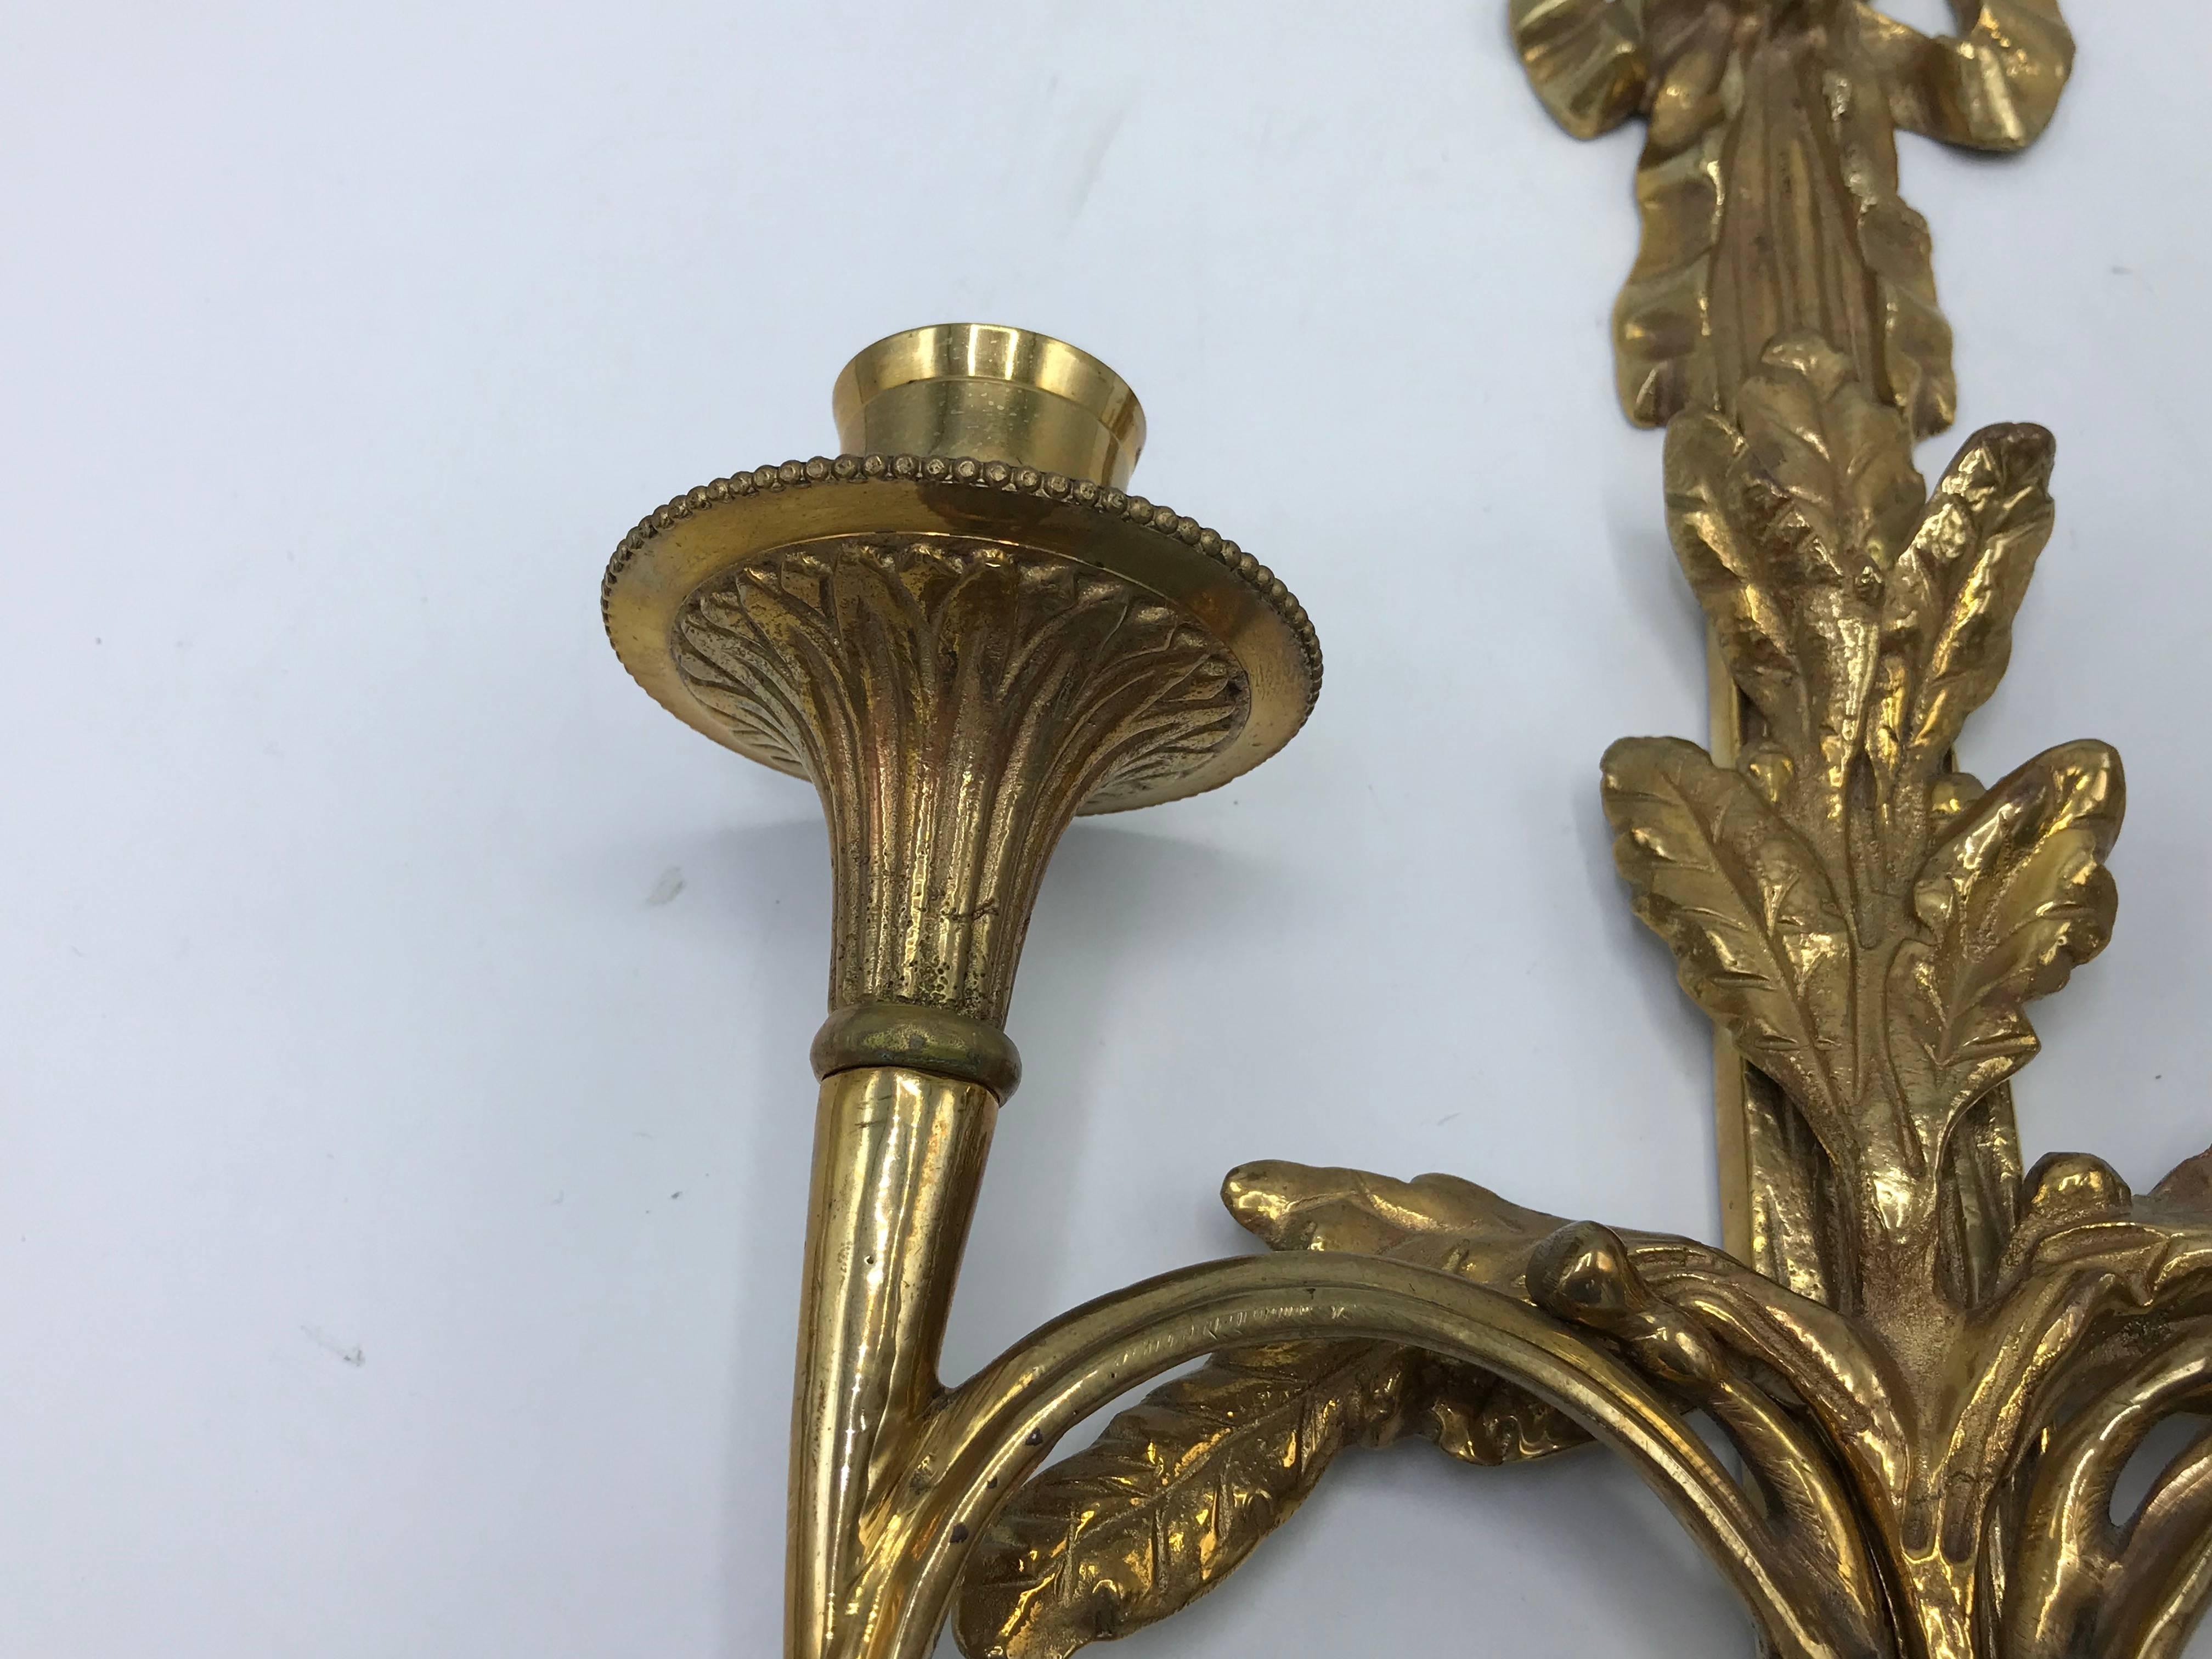 20th Century 1960s Italian Brass Candlestick Wall Sconces with Tassel and Bow Motif, Pair